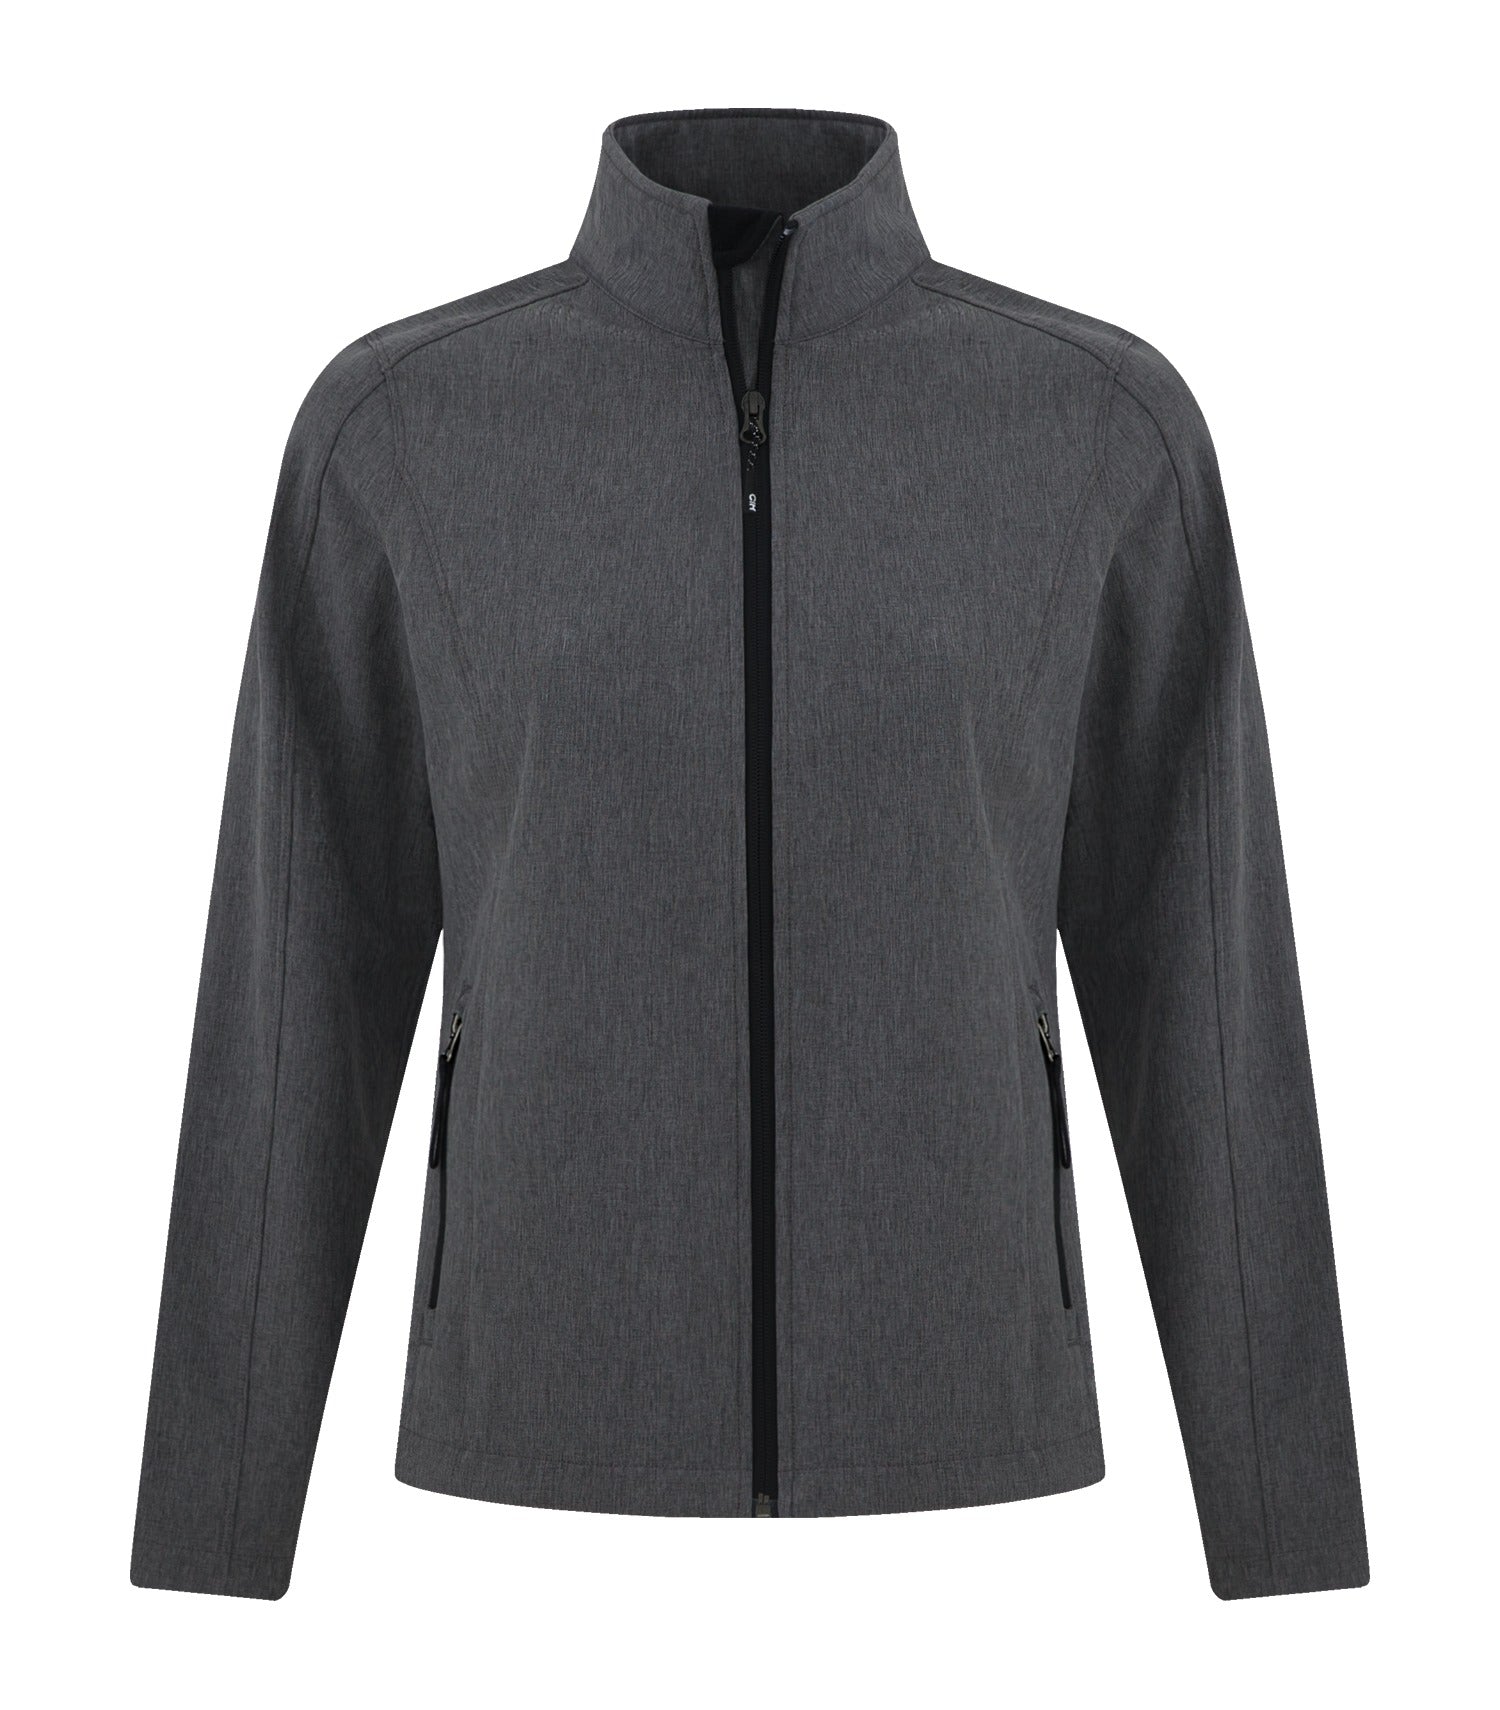 COAL HARBOUR® EVERYDAY WATER REPELLENT SOFT SHELL LADIES' JACKET. L7603